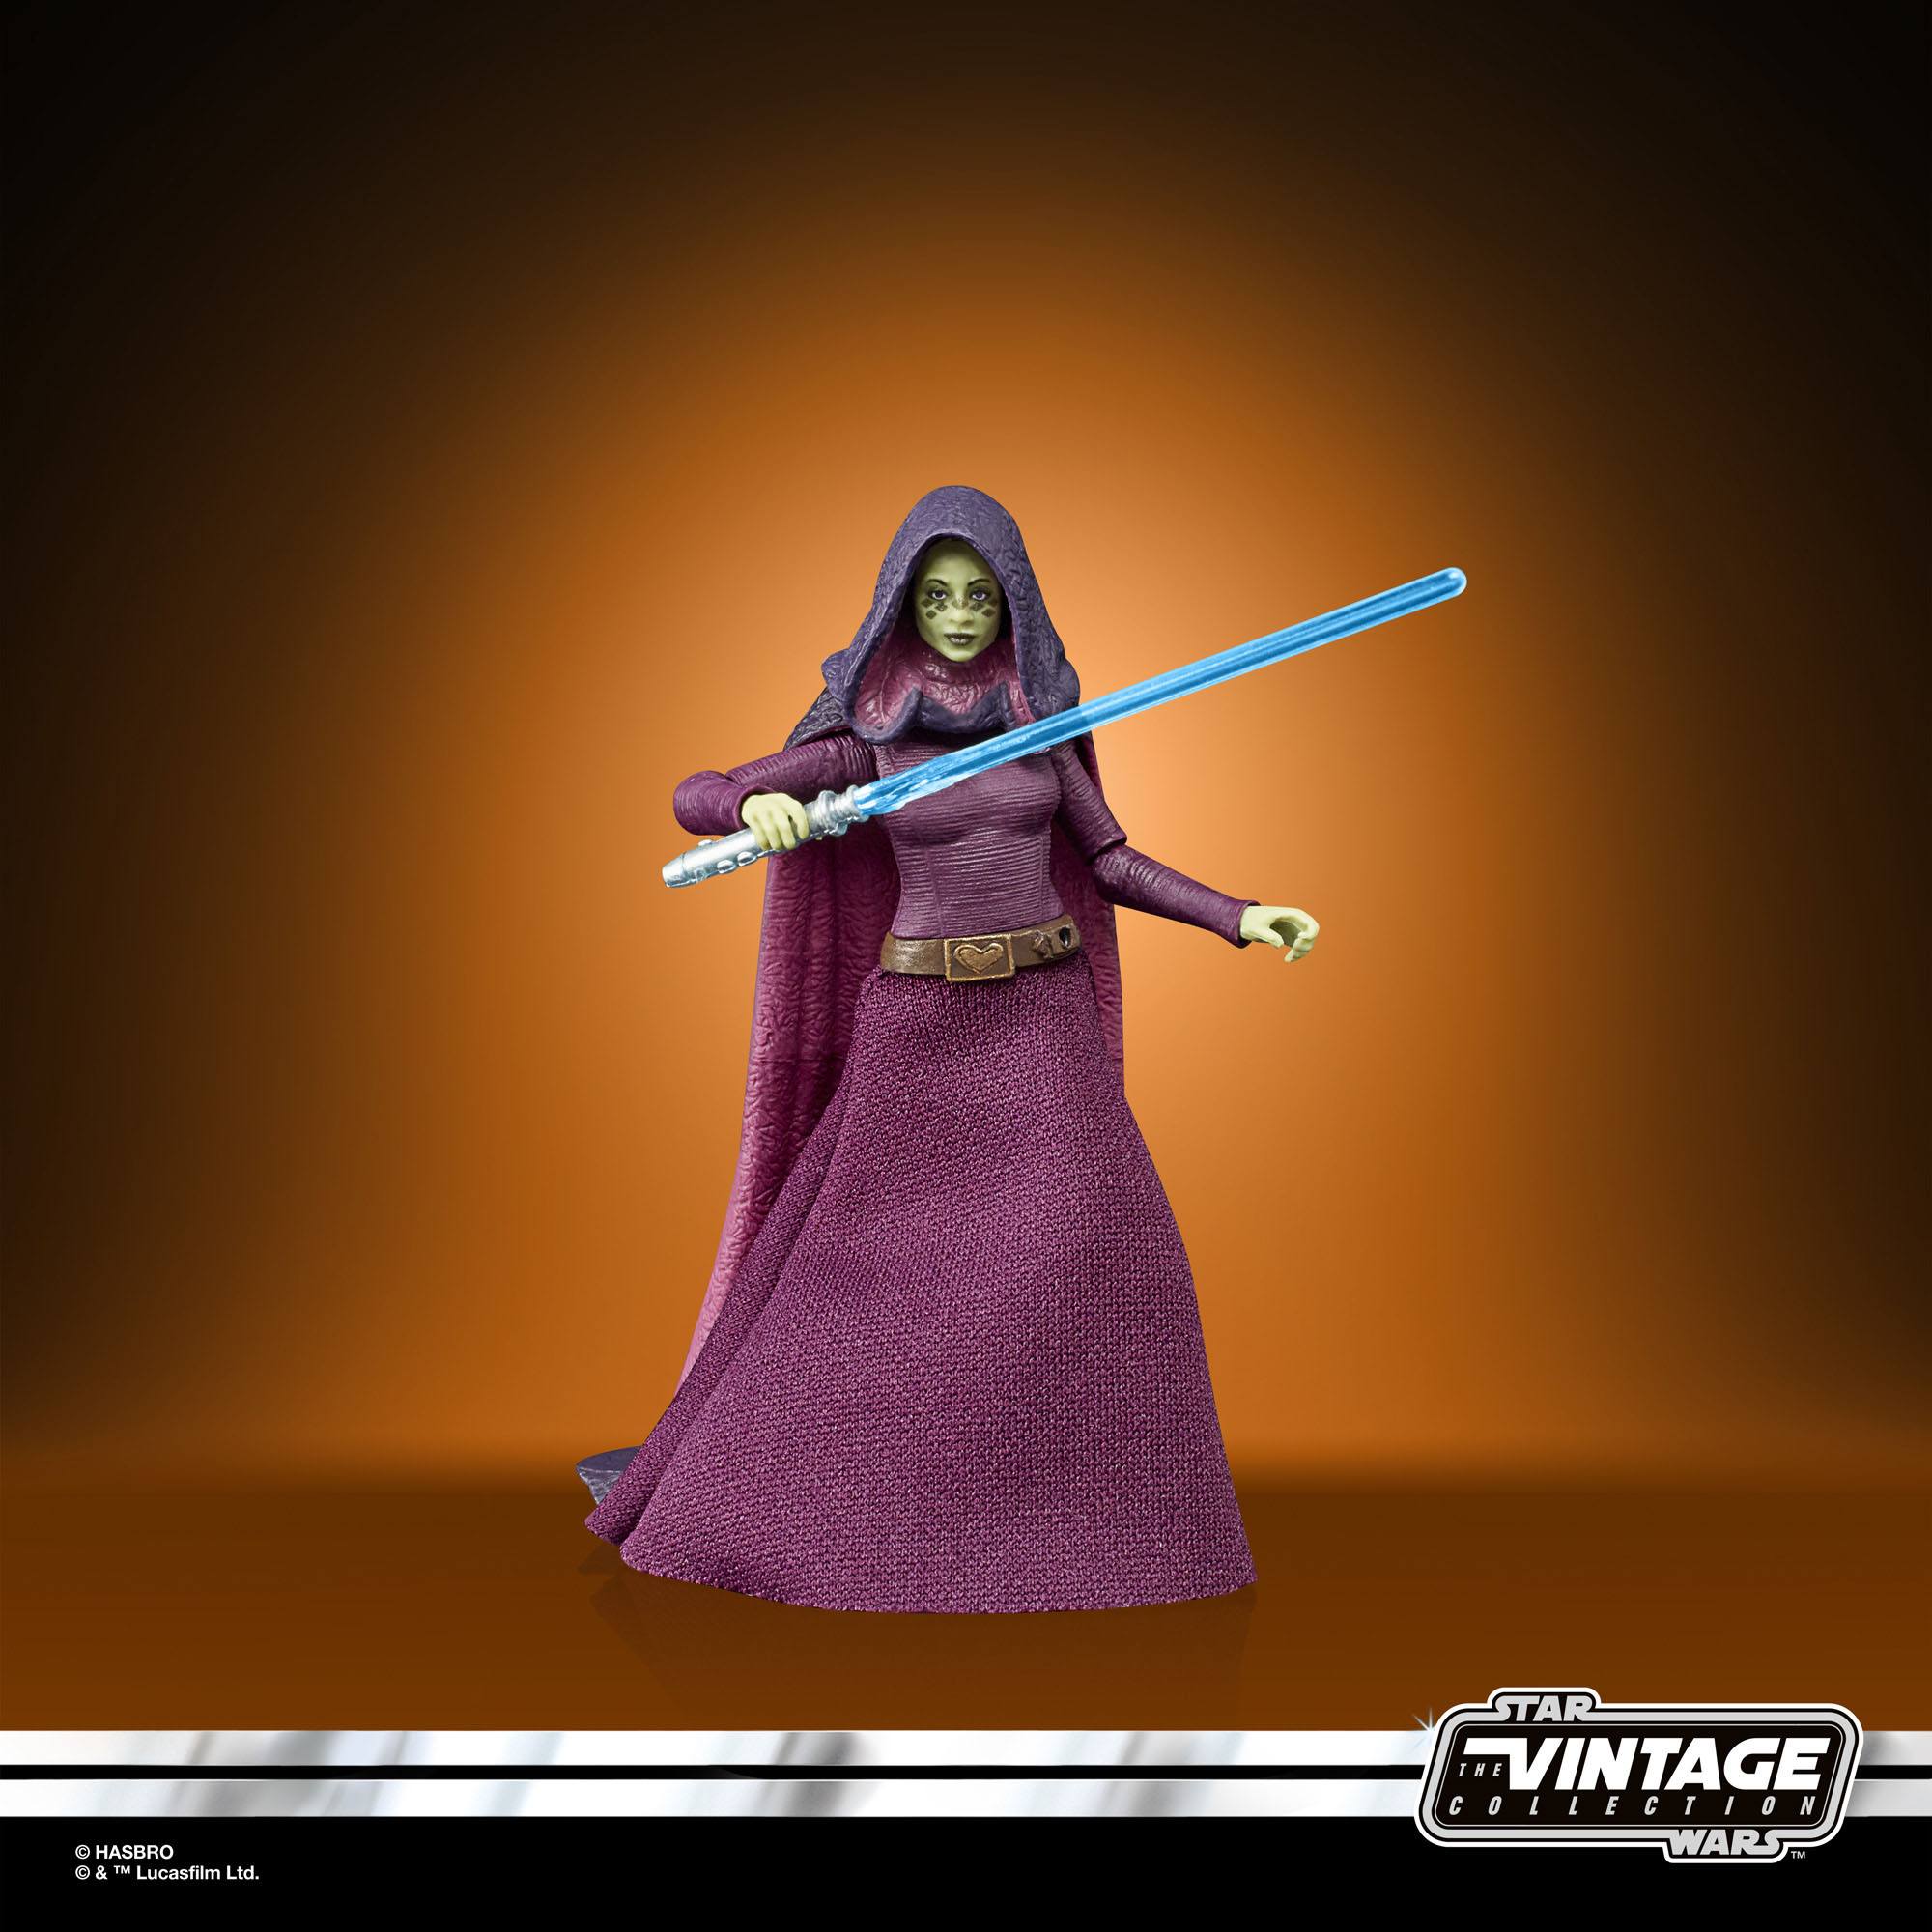 Star Wars The Clone Wars Vintage Collection Actionfigur 2022 Barriss Offee 10 cm F54175L00 5010993980949